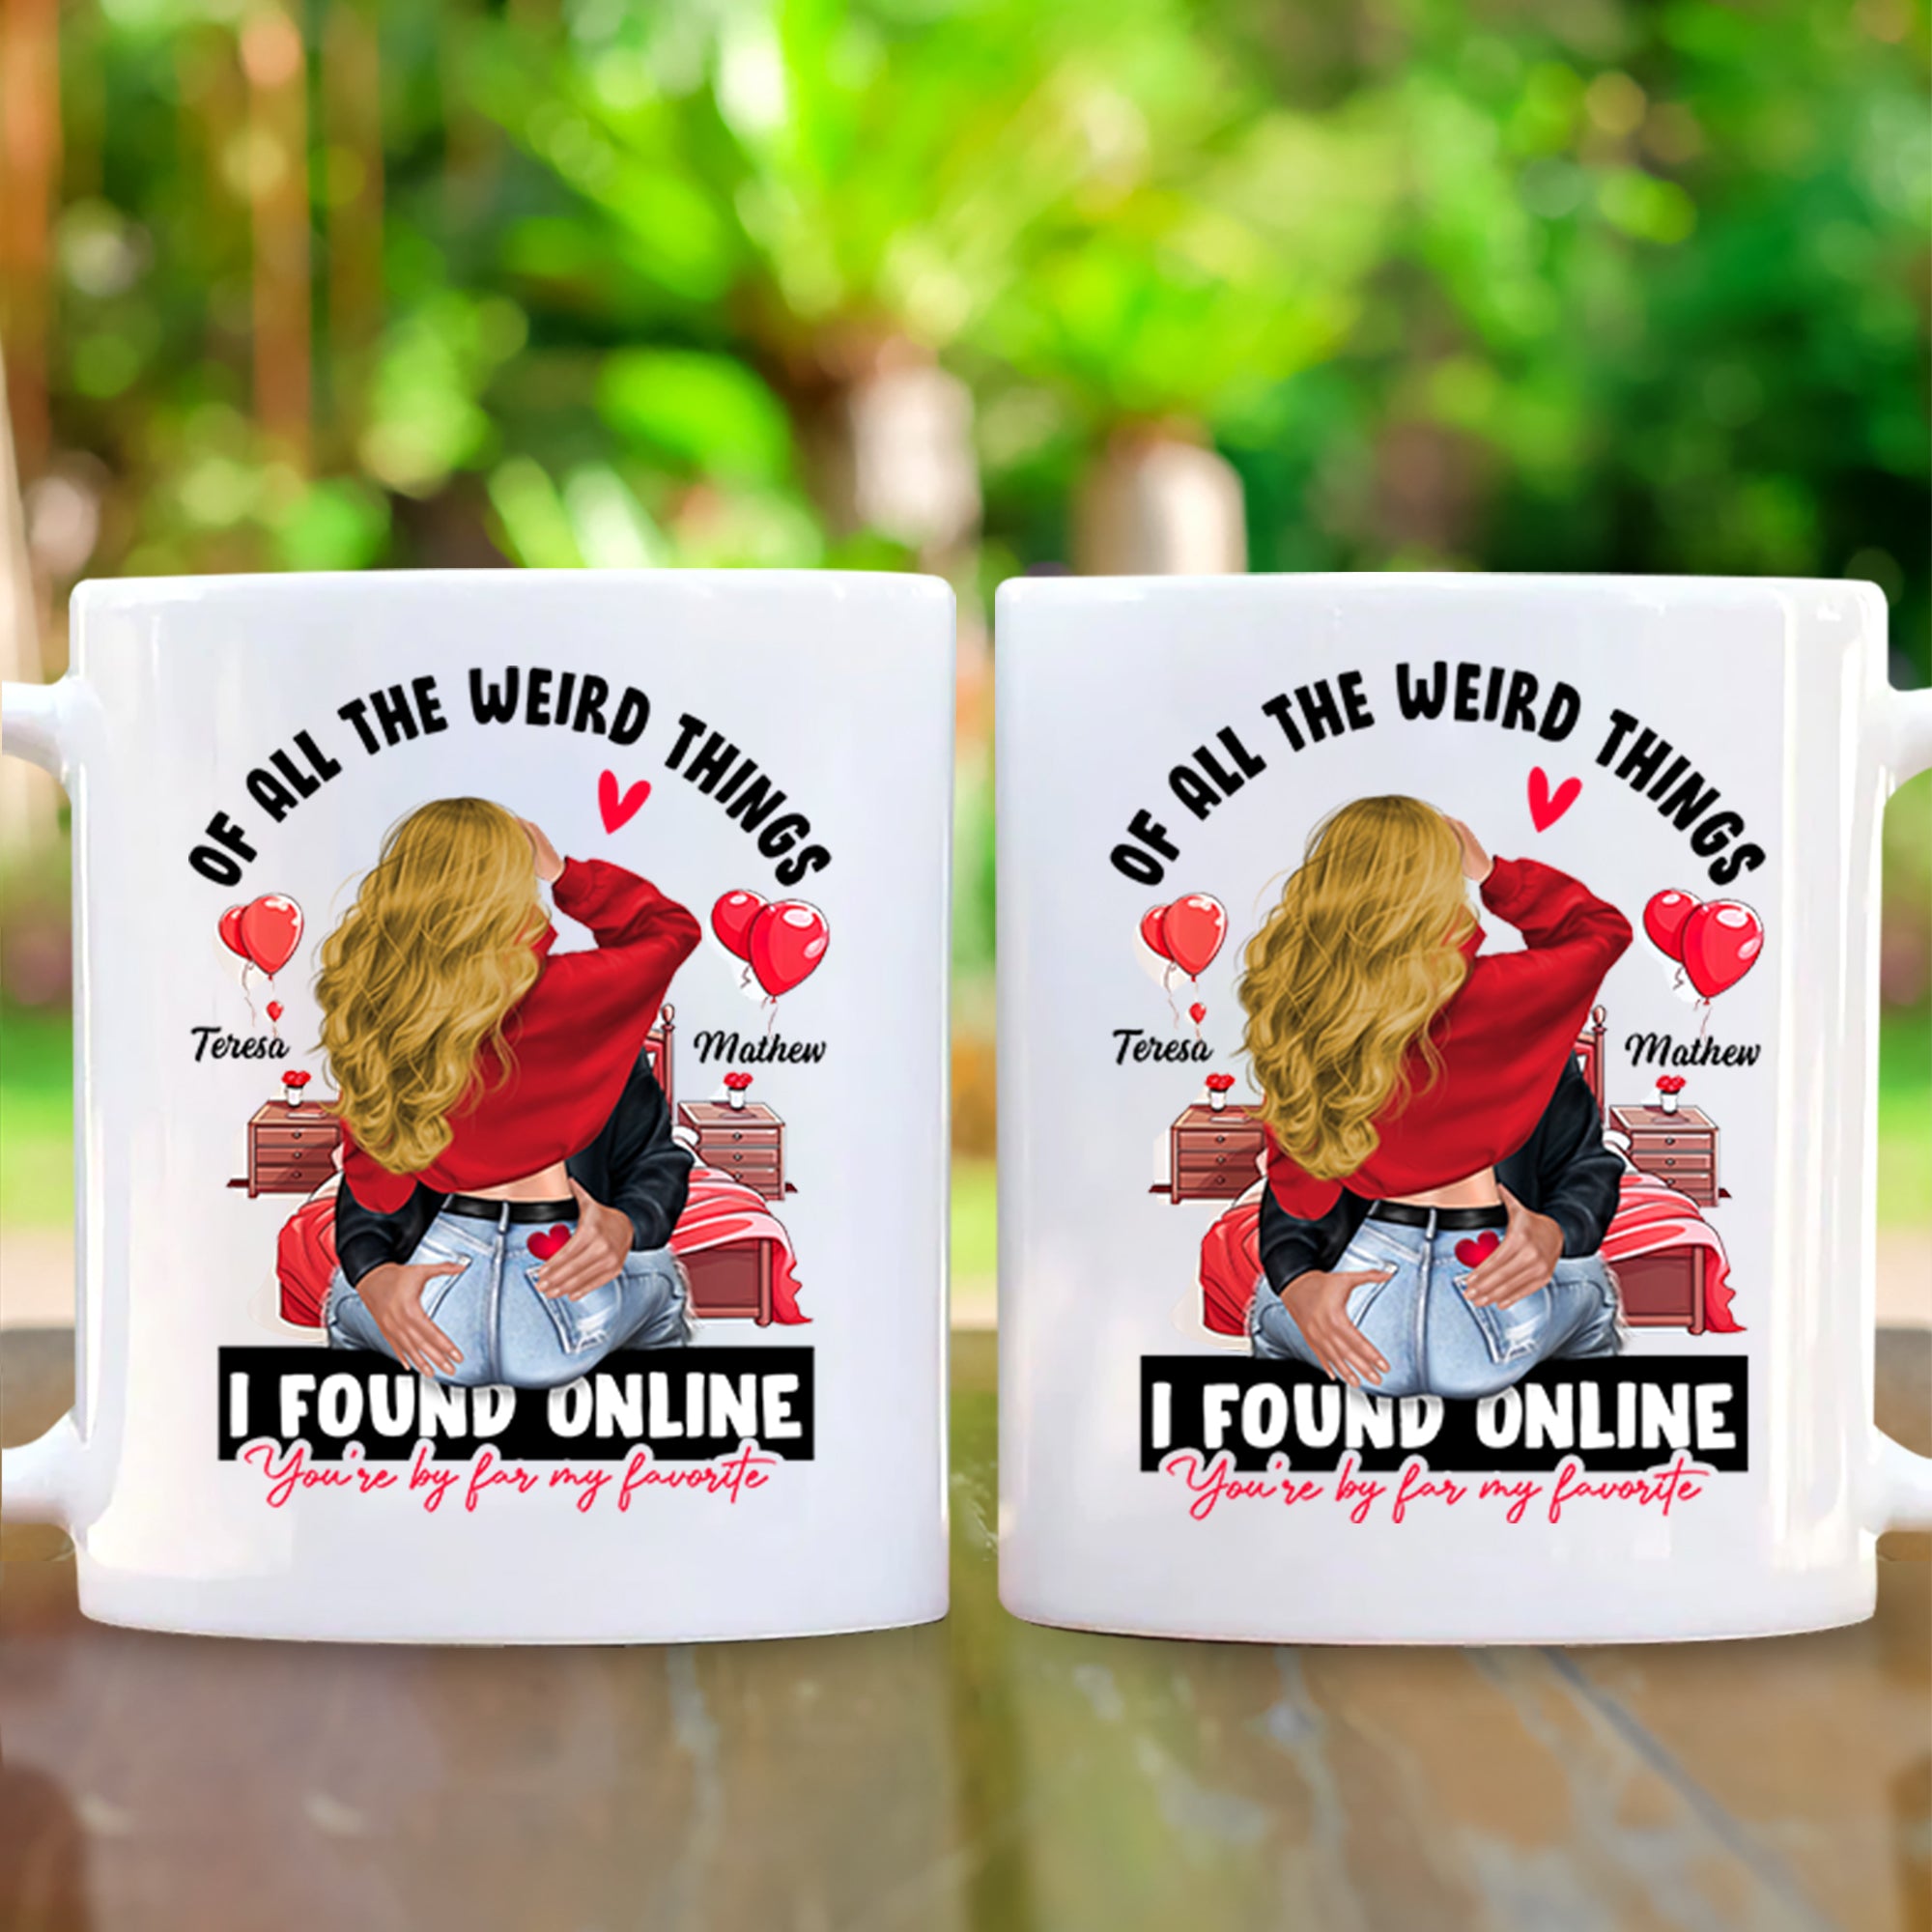 Of All The Weird Things I Found Online You're By Far My Favorite - Personalized Mug For Couple